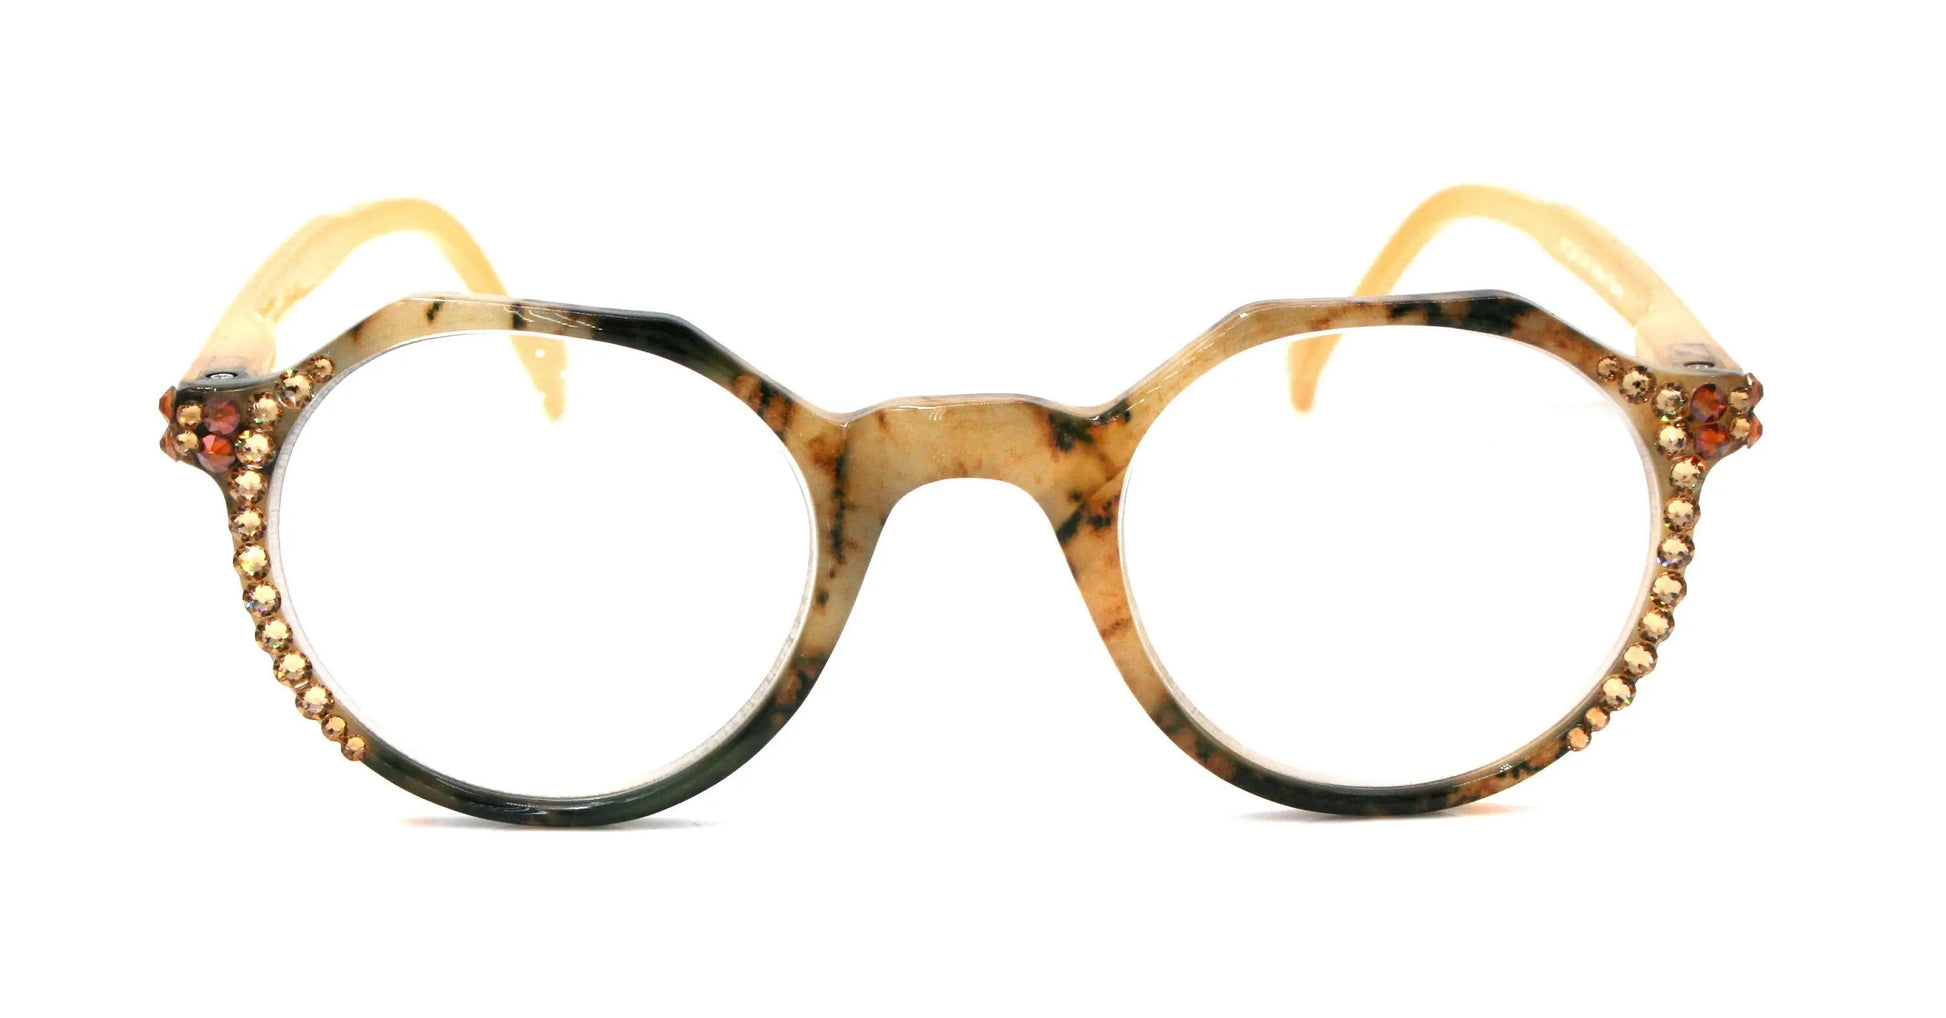 The Hexagon, (Bling) Women Reading Glasses W (Cooper, L. Colorado) Genuine European Crystals   (Yellow, Tortoise Shell) NY Fifth Avenue 